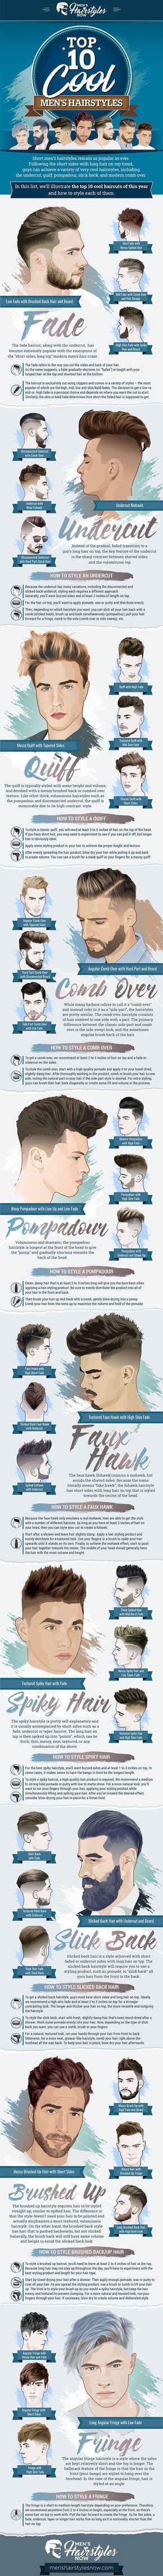 Cool Hairstyles For Men - Best Trendy and Stylish Men's Haircuts 2017...